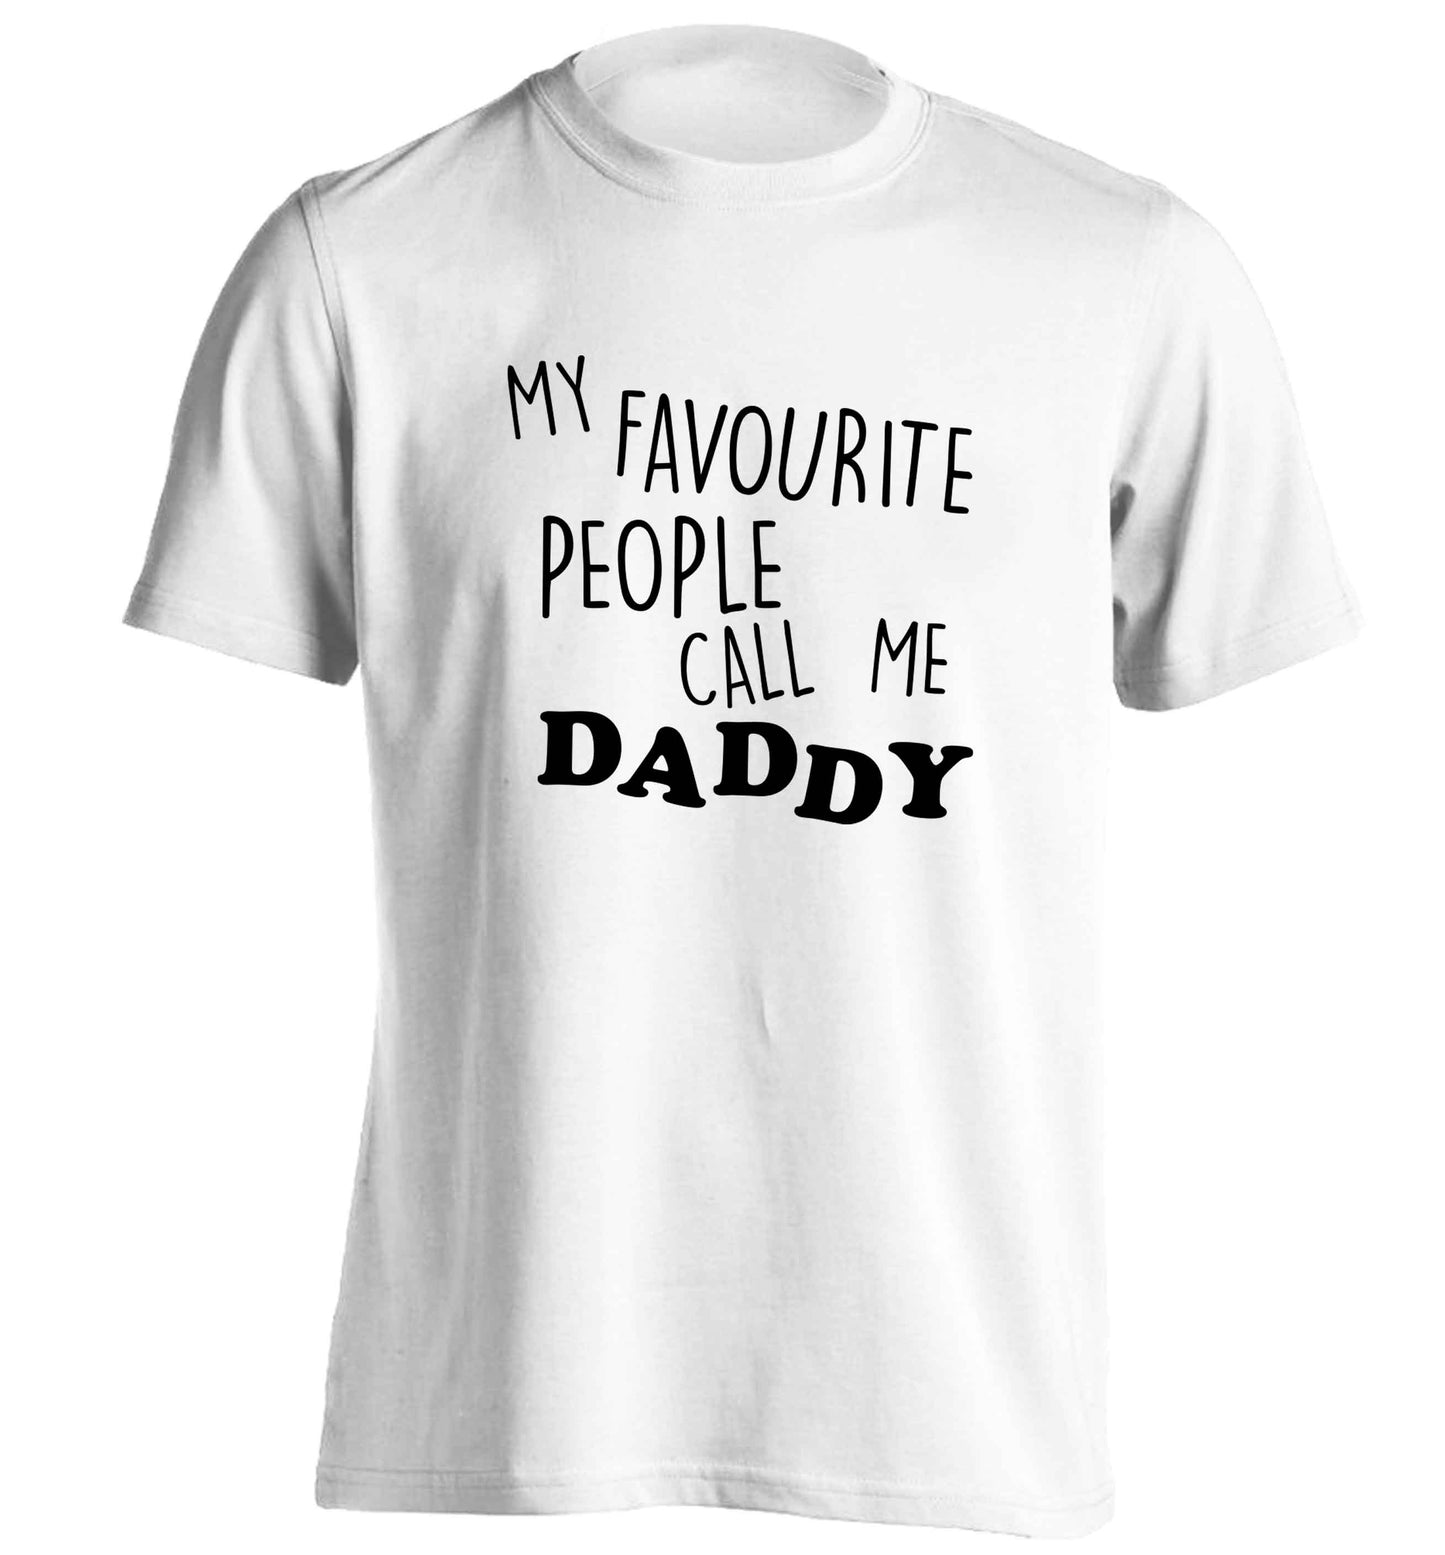 My favourite people call me daddy adults unisex white Tshirt 2XL